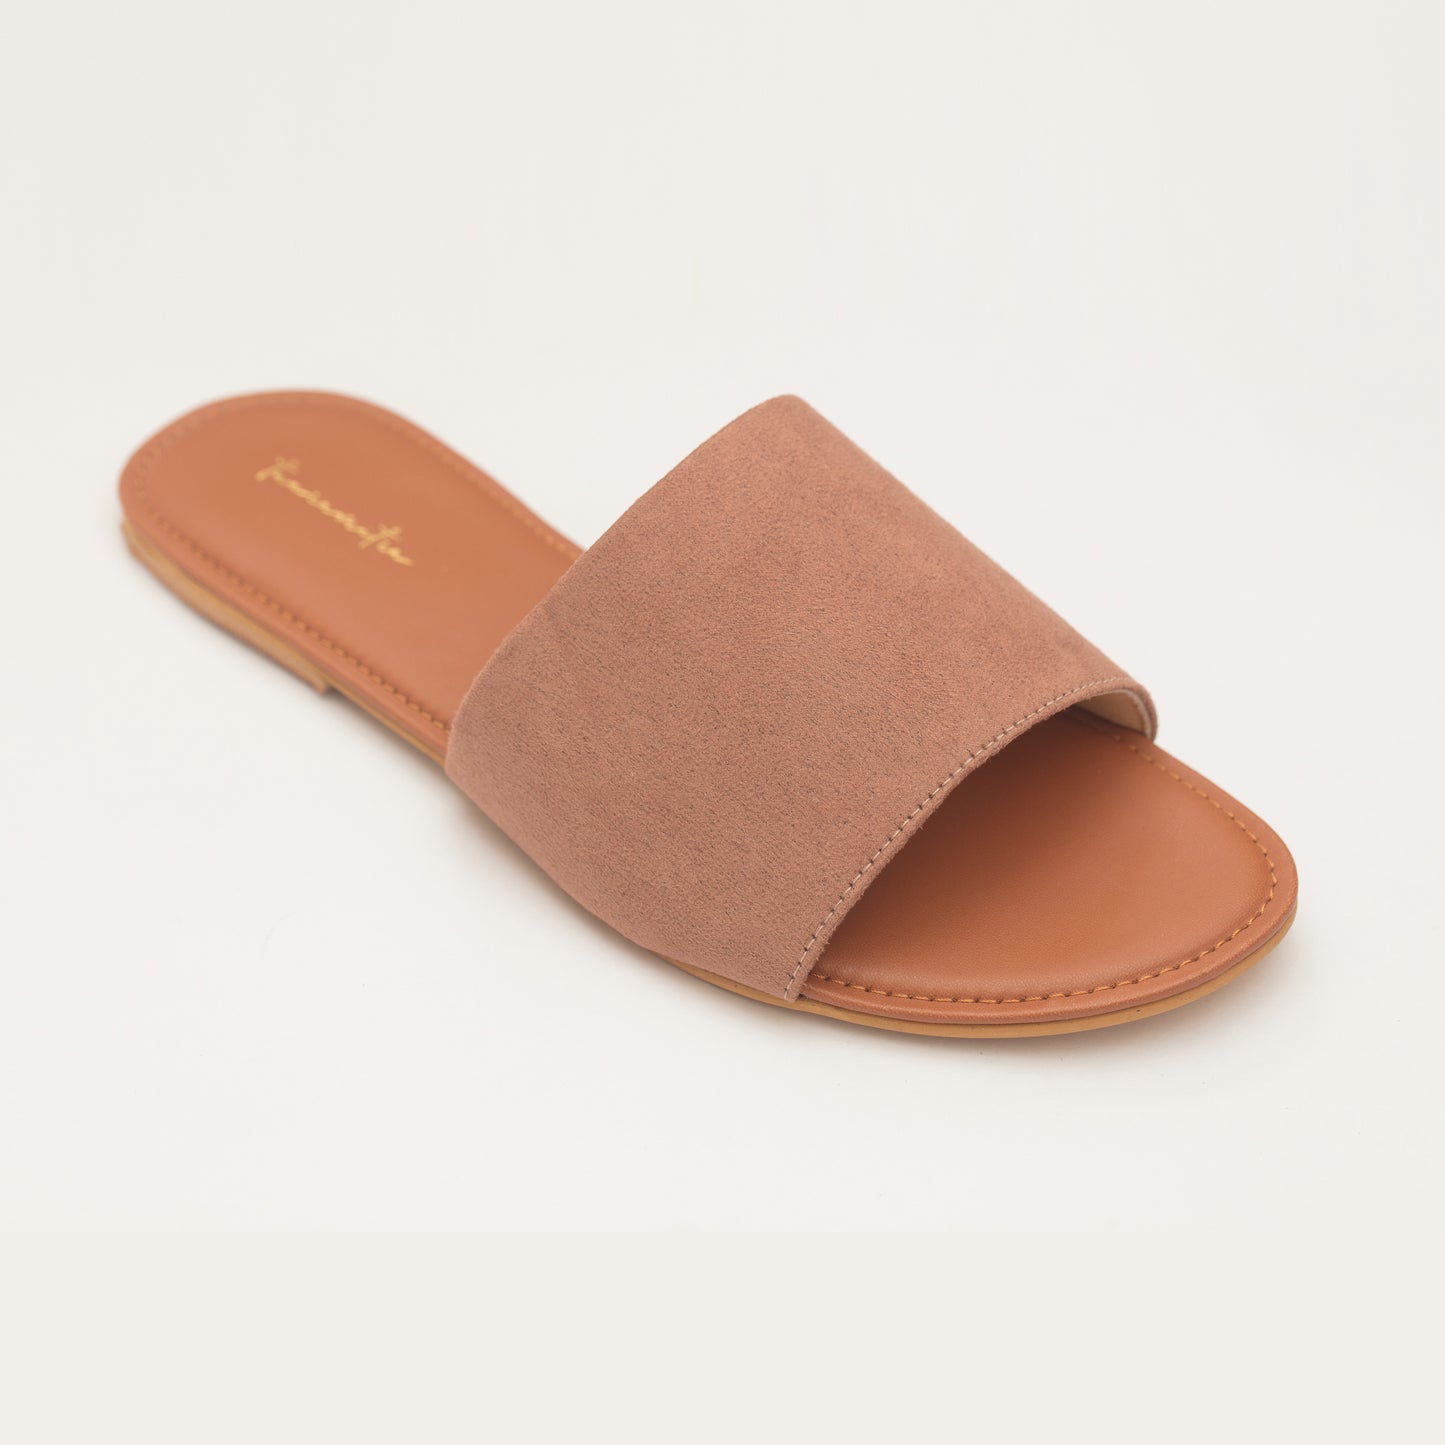 Lucy Suede flats in Peach